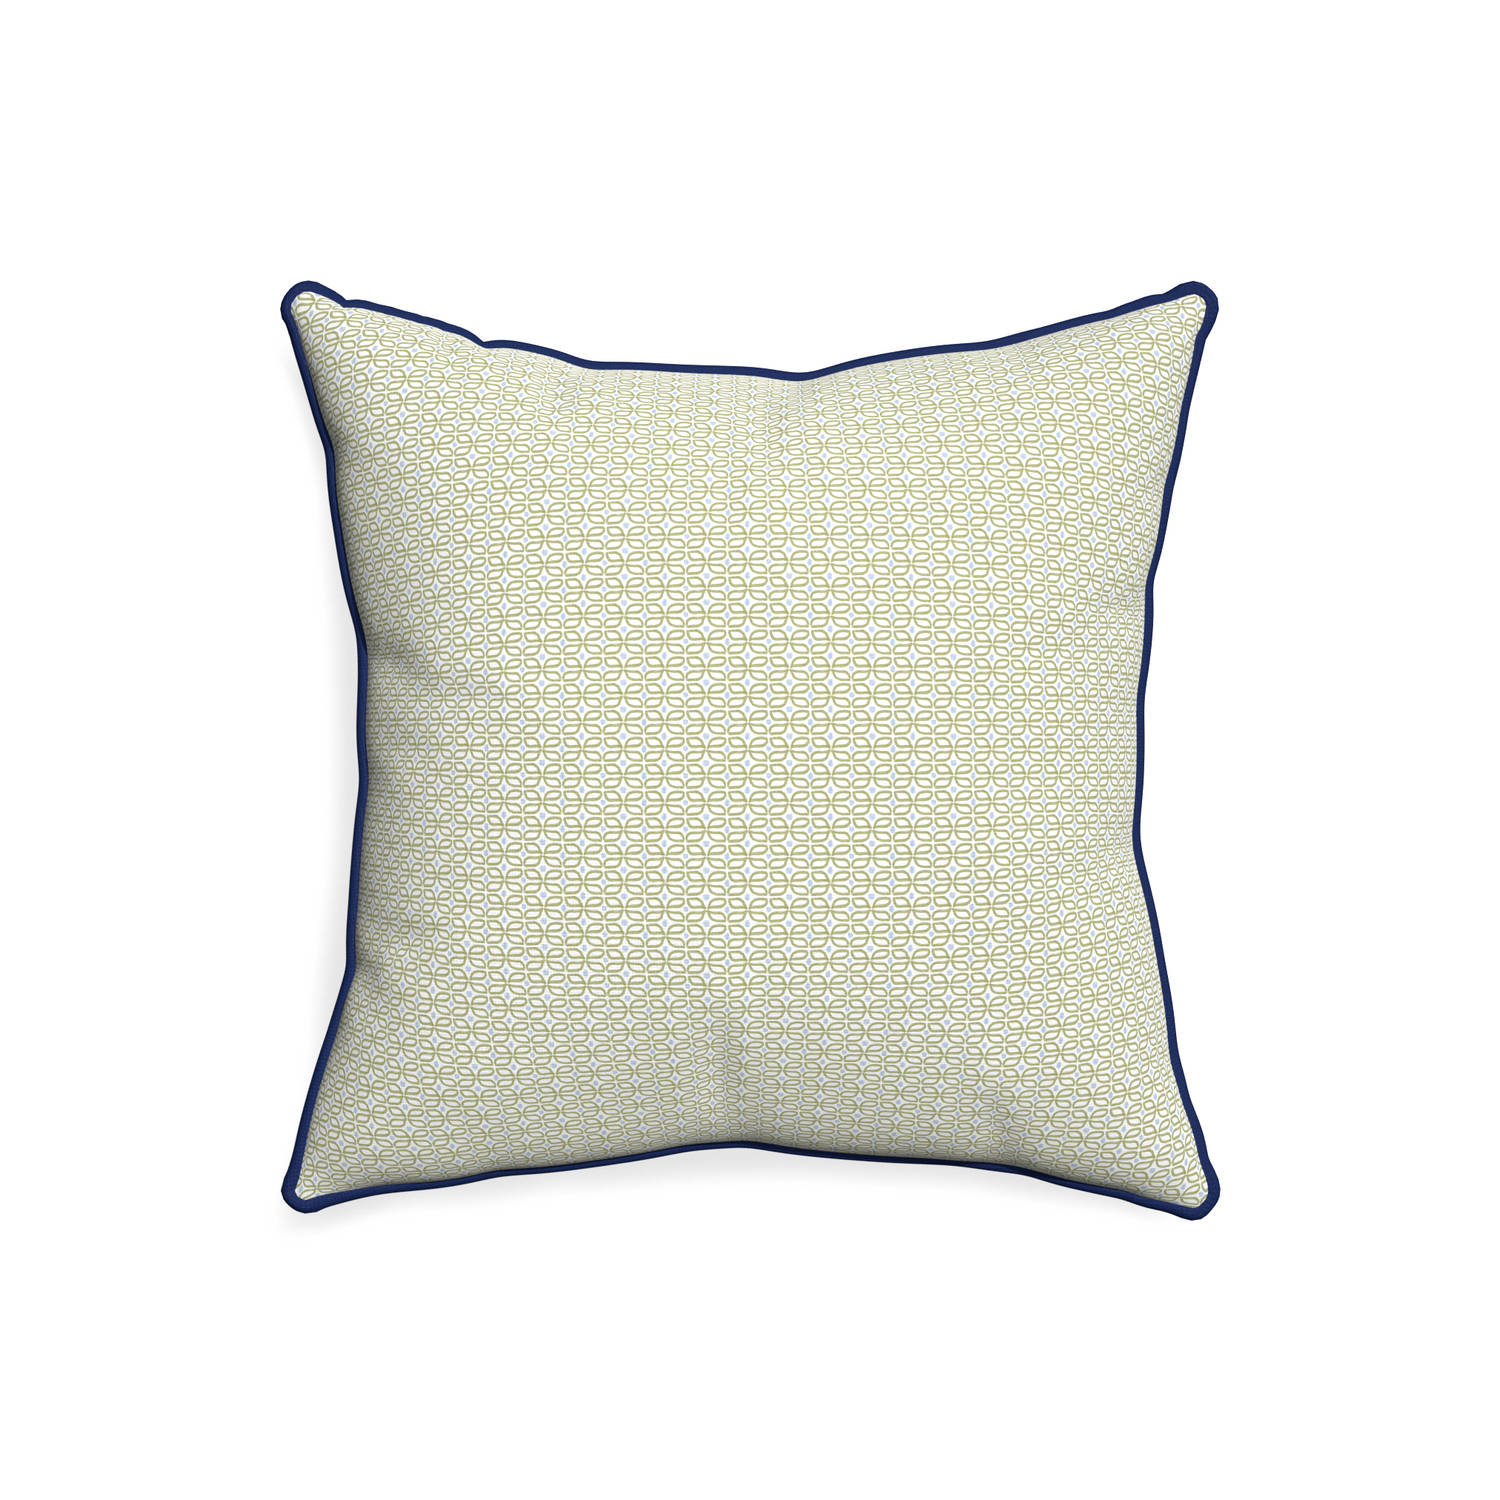 20-square loomi moss custom pillow with midnight piping on white background